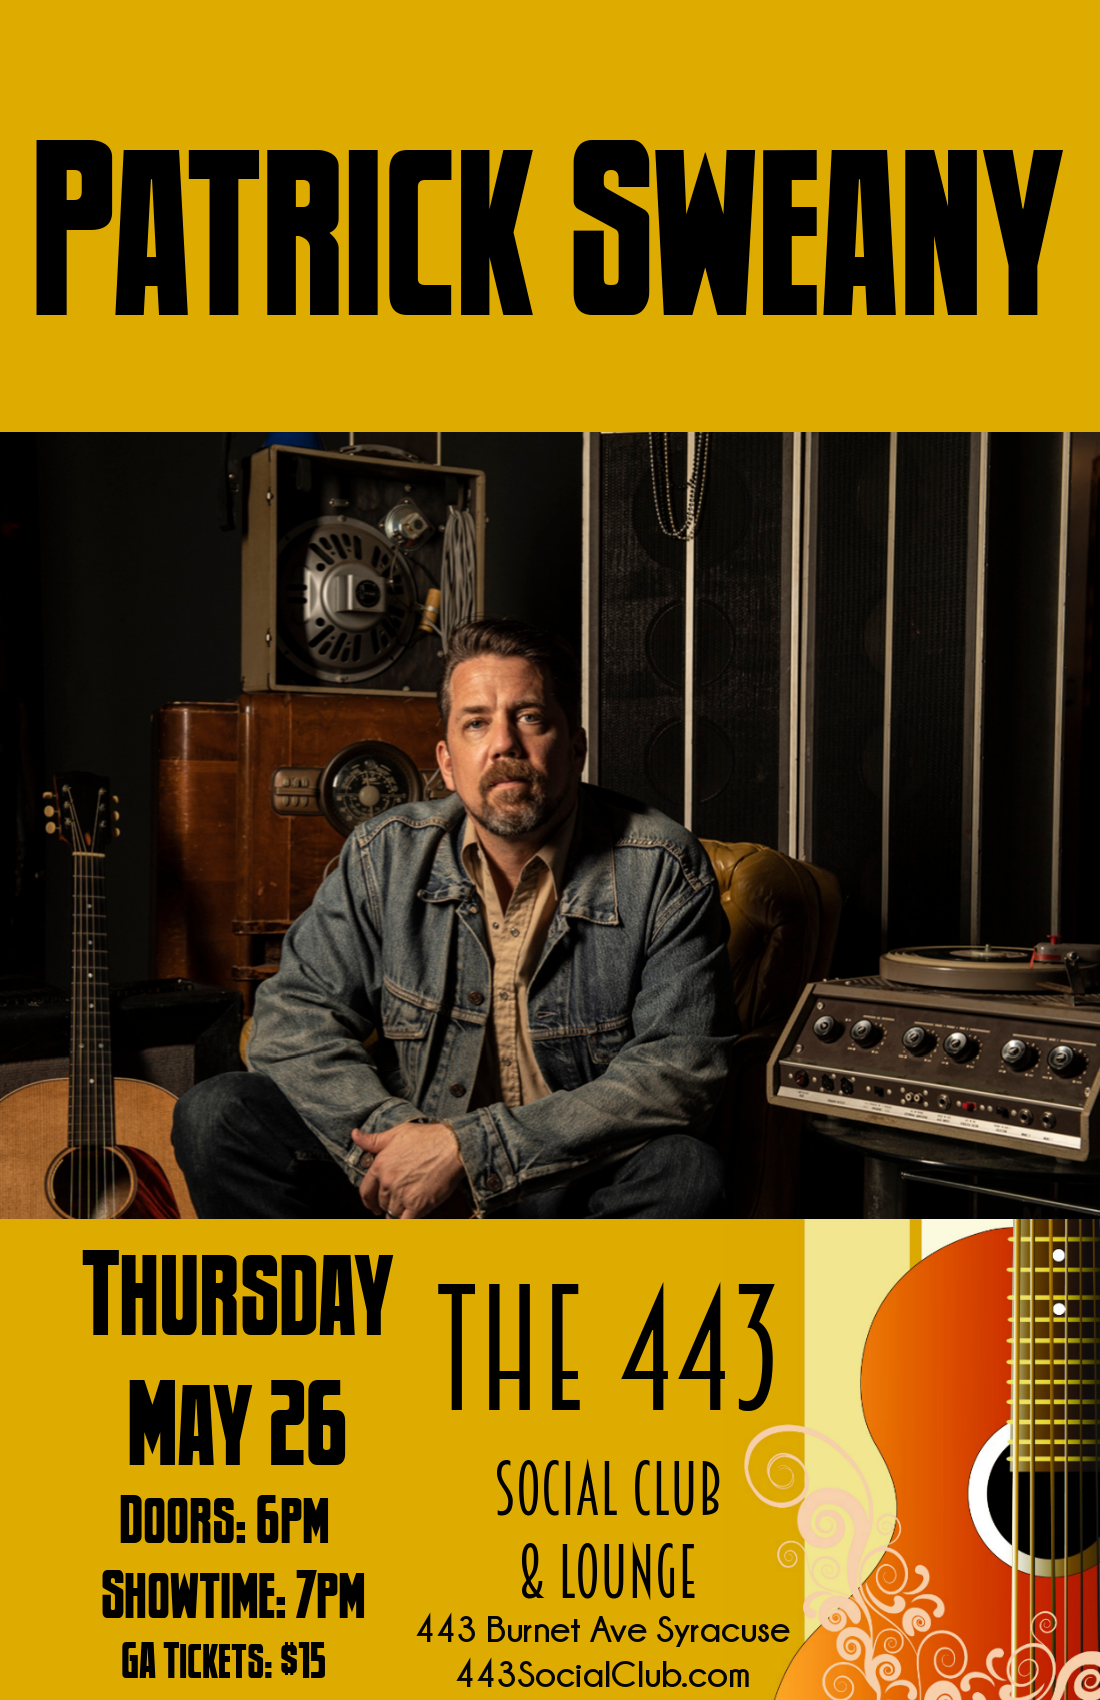 Patrick Sweany at the 443